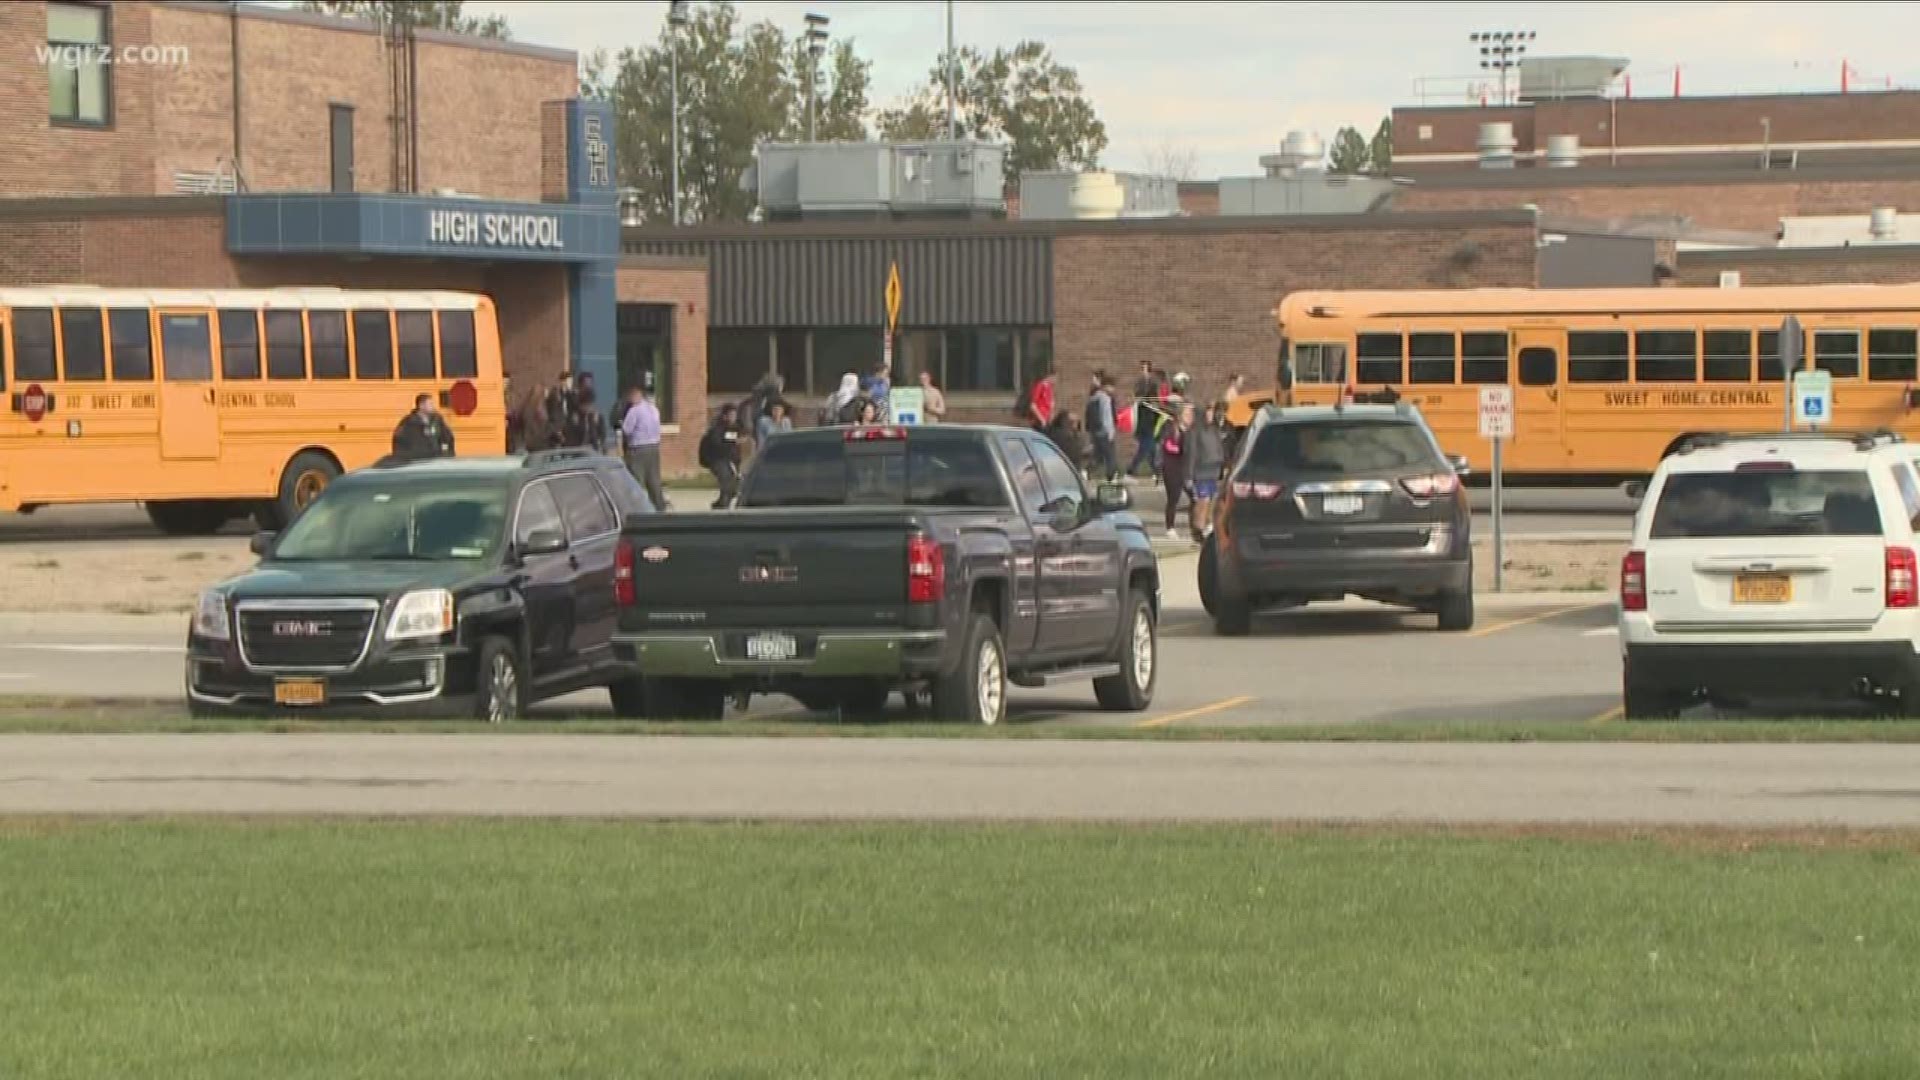 Sweet High S Com Videos - Sweet Home High School placed on lockdown Thursday afternoon | wgrz.com